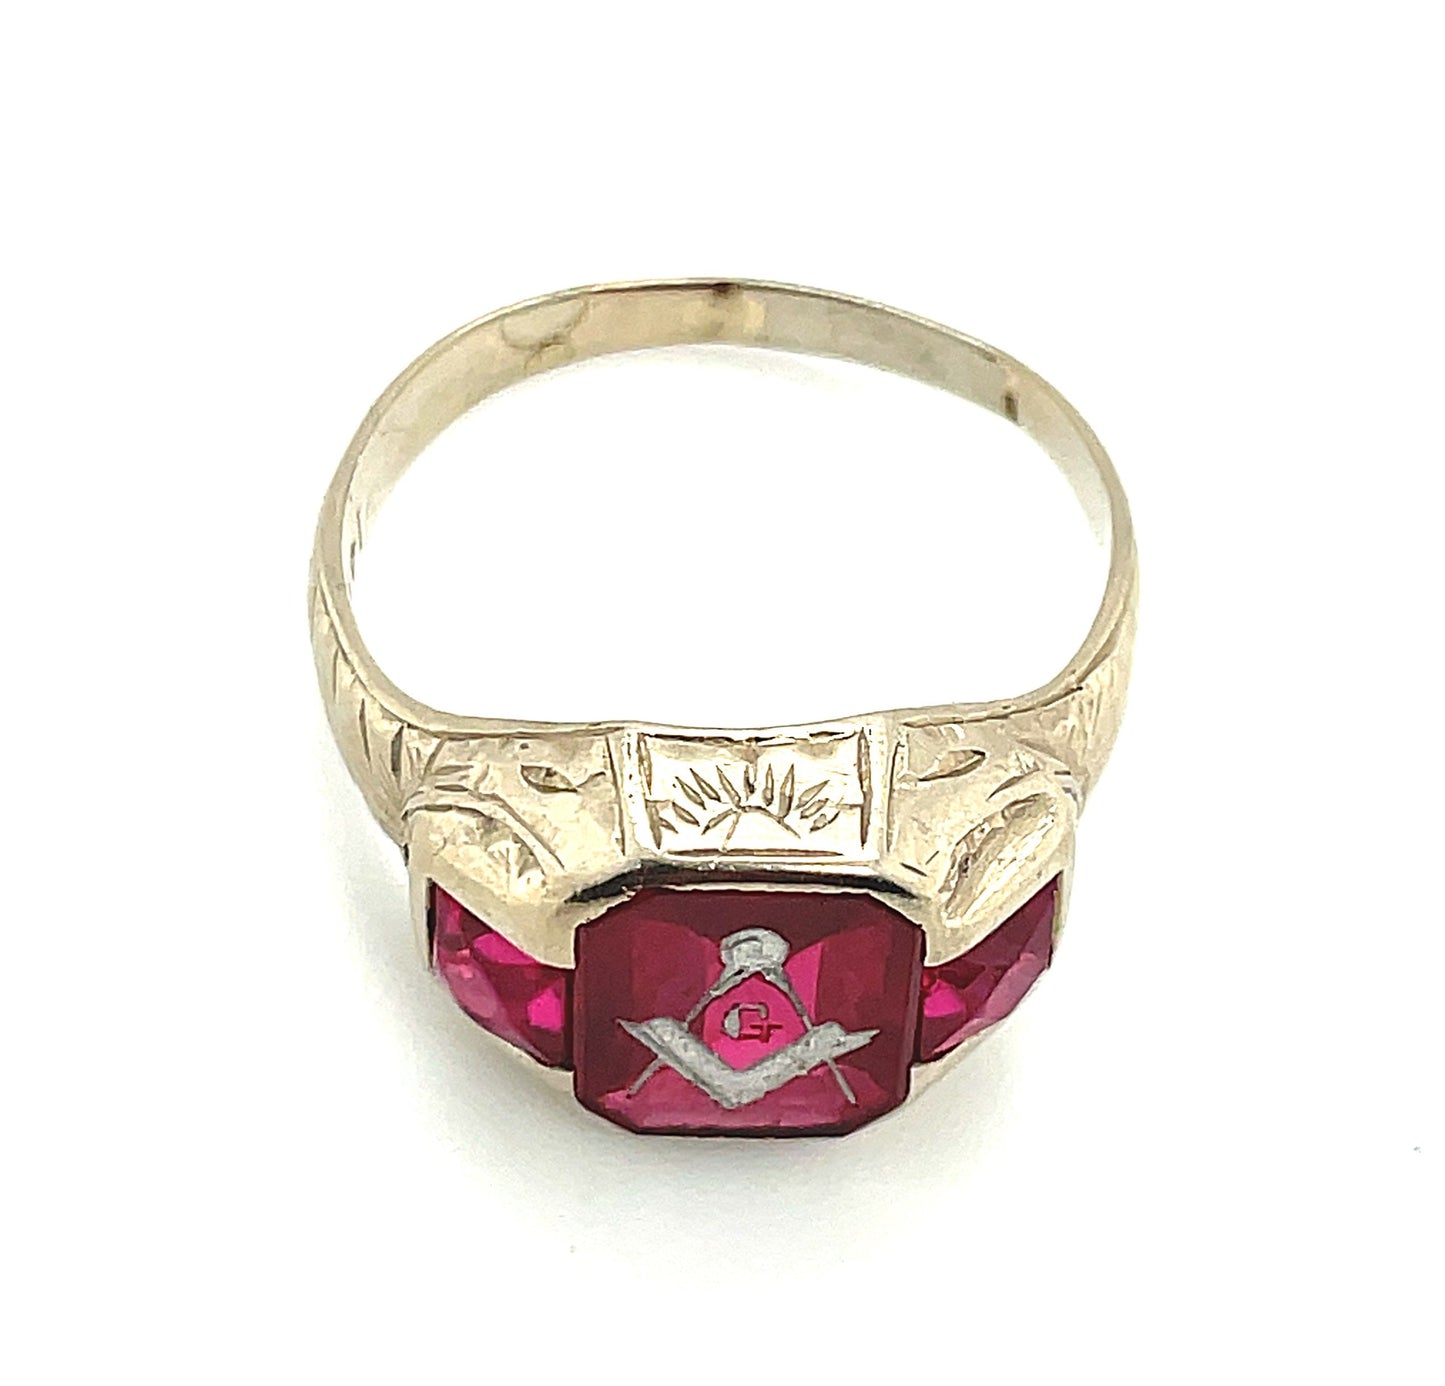 Vintage 14k Yellow Gold Masonic Ring Synthetic Rubies 6.08g Size 9.75